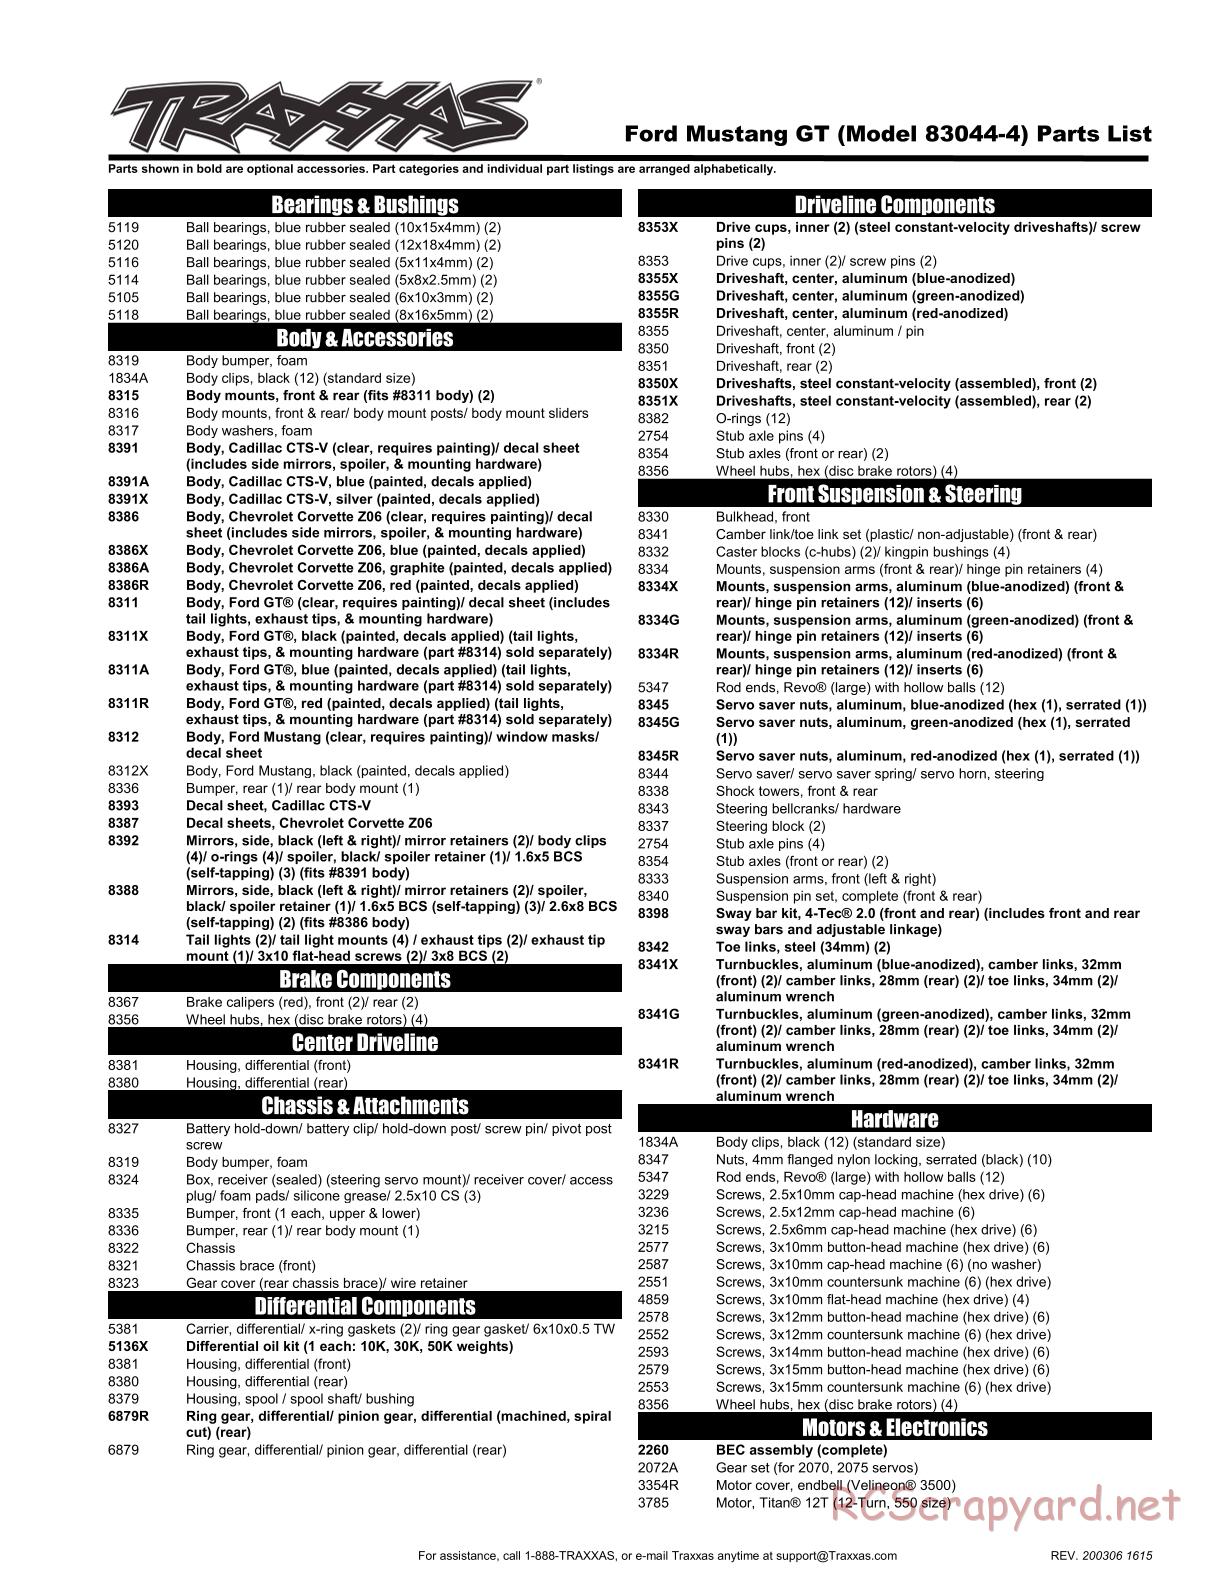 Traxxas - Ford Mustang GT - Parts List - Page 1